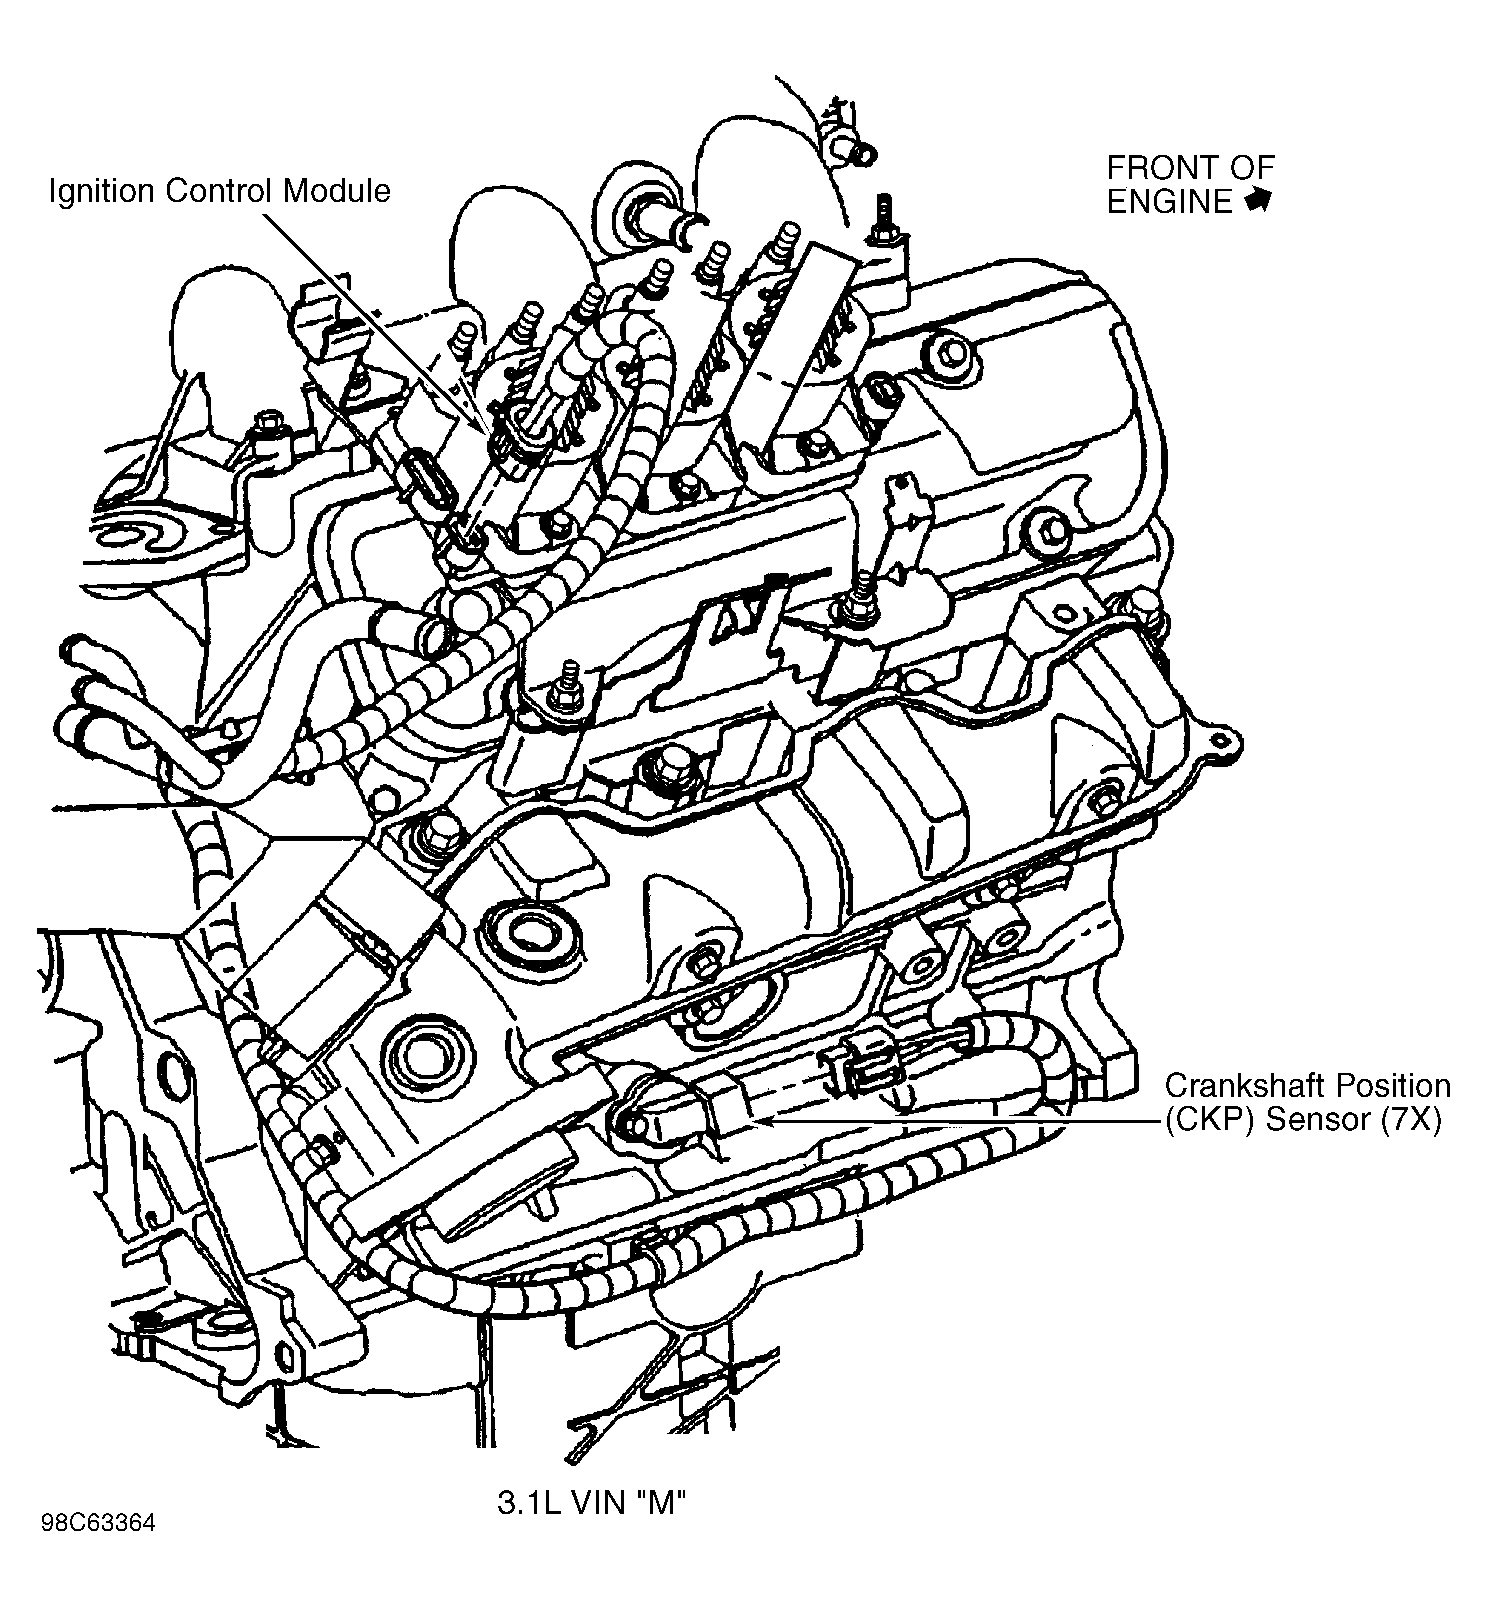 Chevrolet Monte Carlo LS 1999 - Component Locations -  Right Side Of Engine (3.1L VIN M)